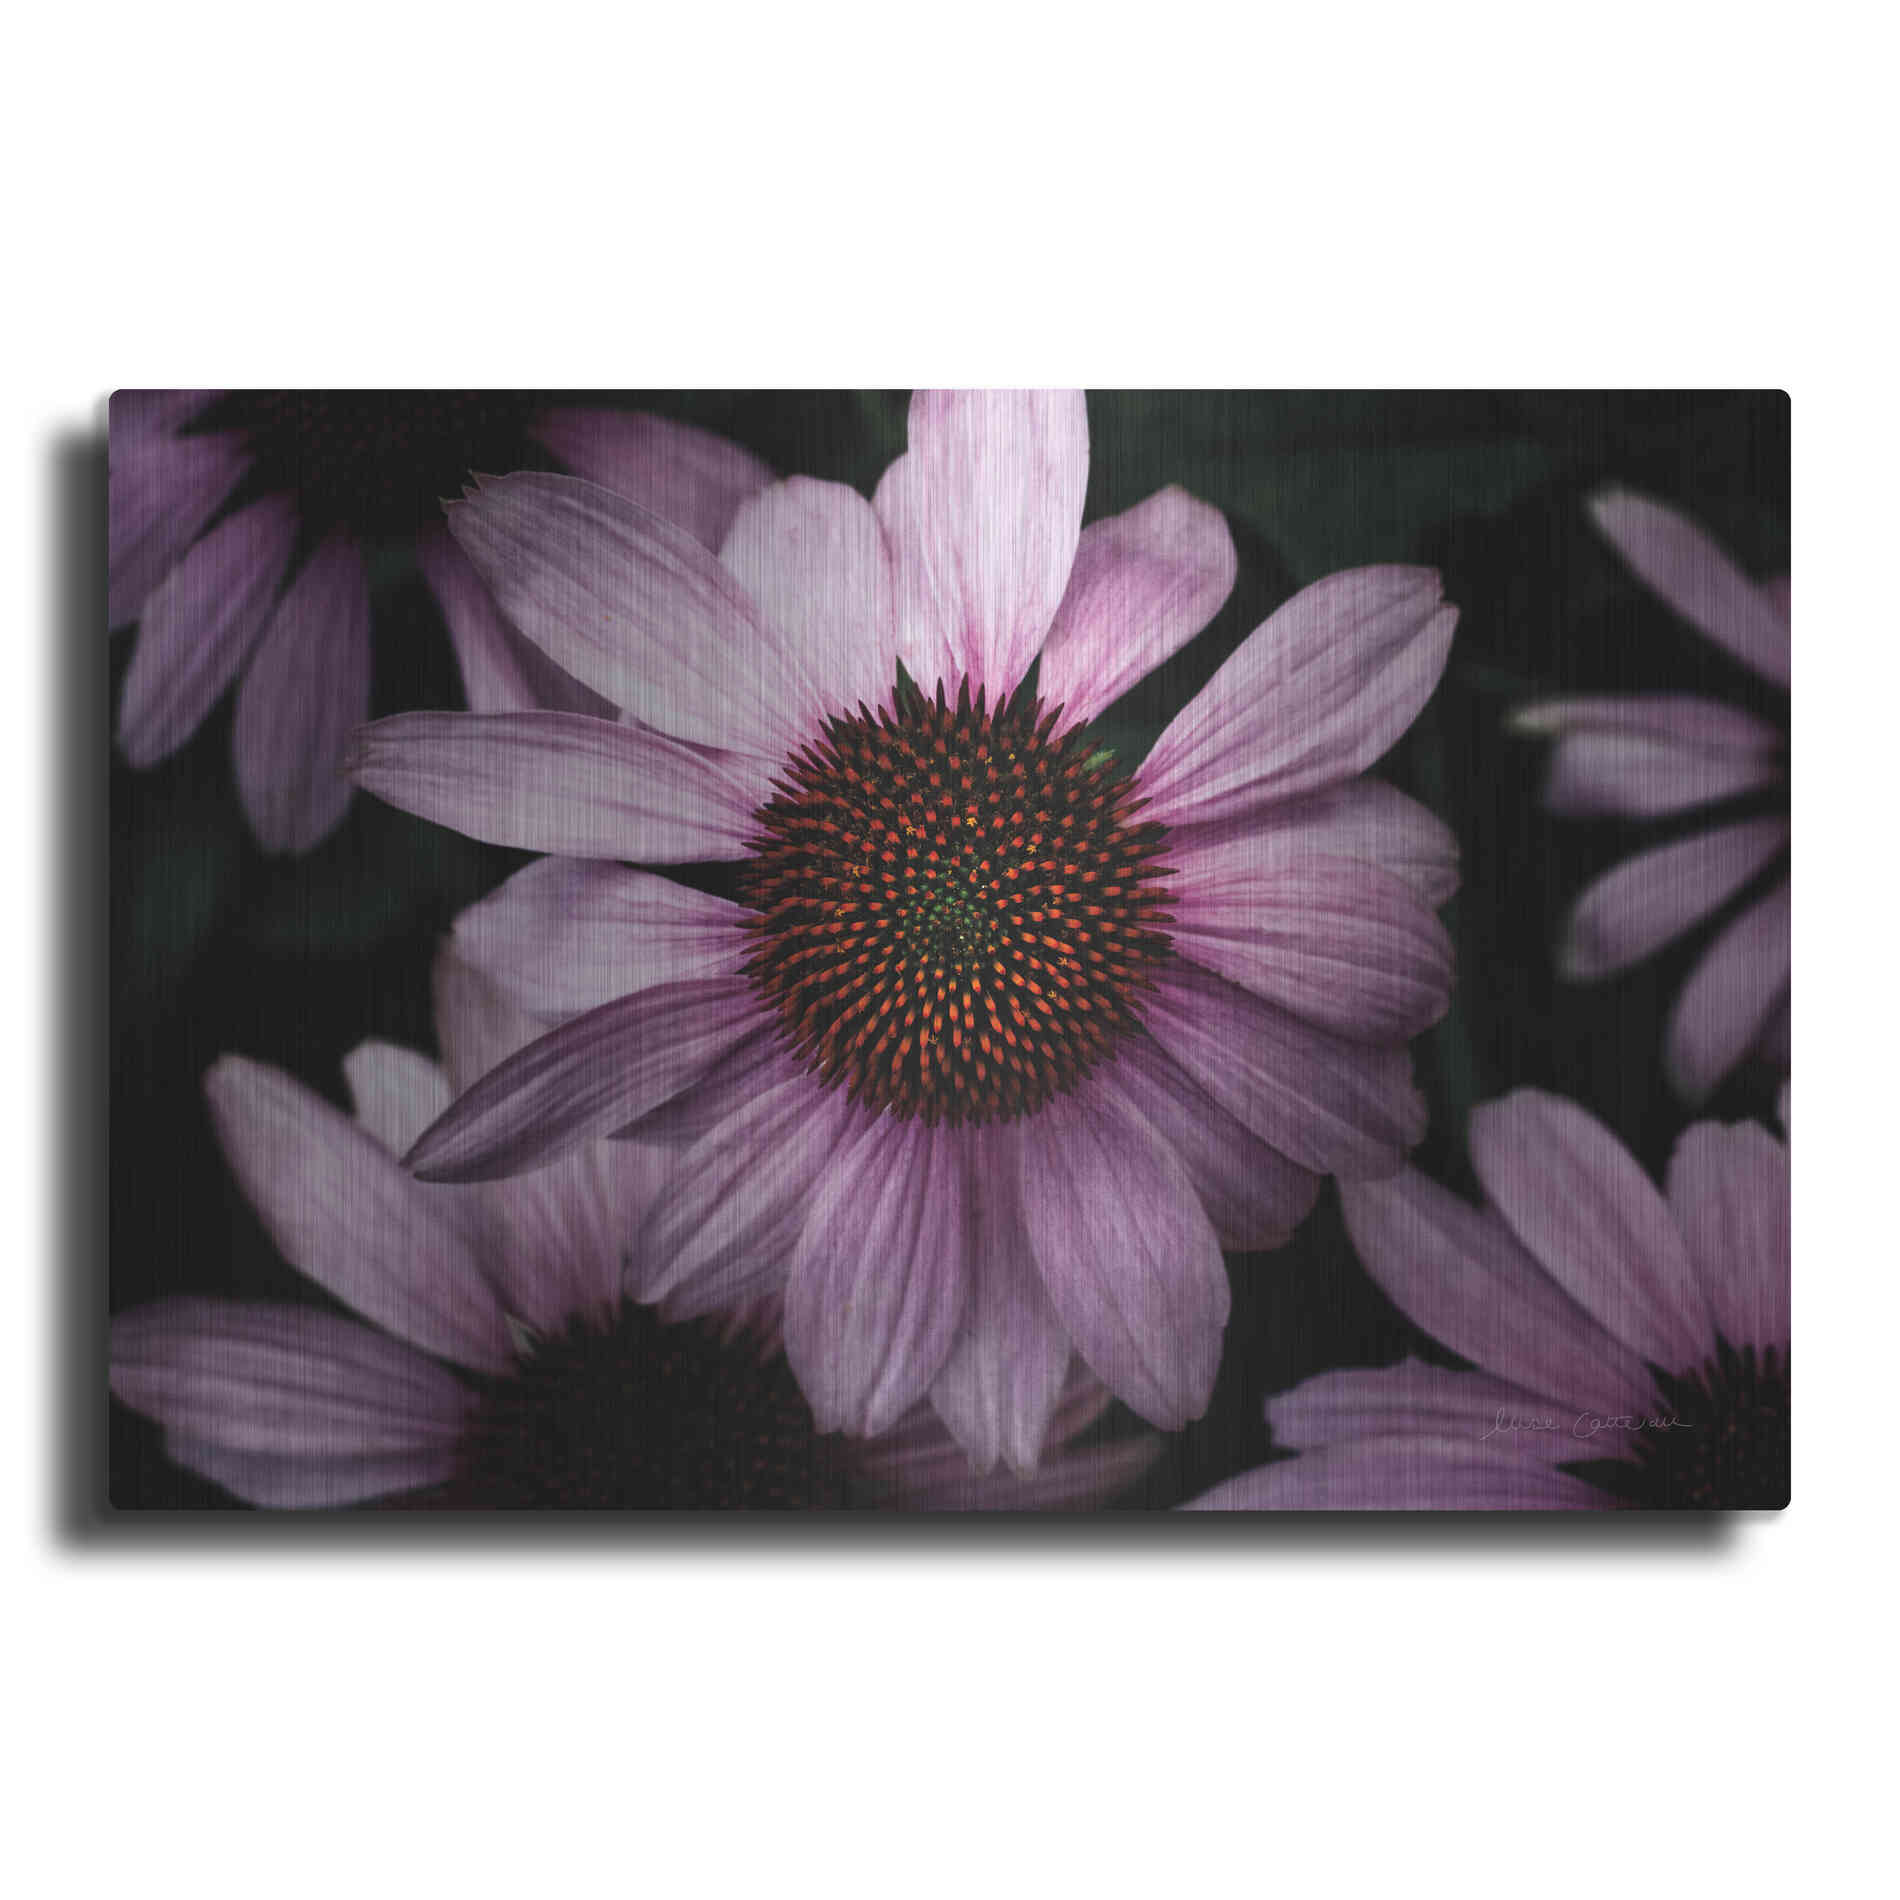 Luxe Metal Art 'Echinacea' by Elise Catterall, Metal Wall Art